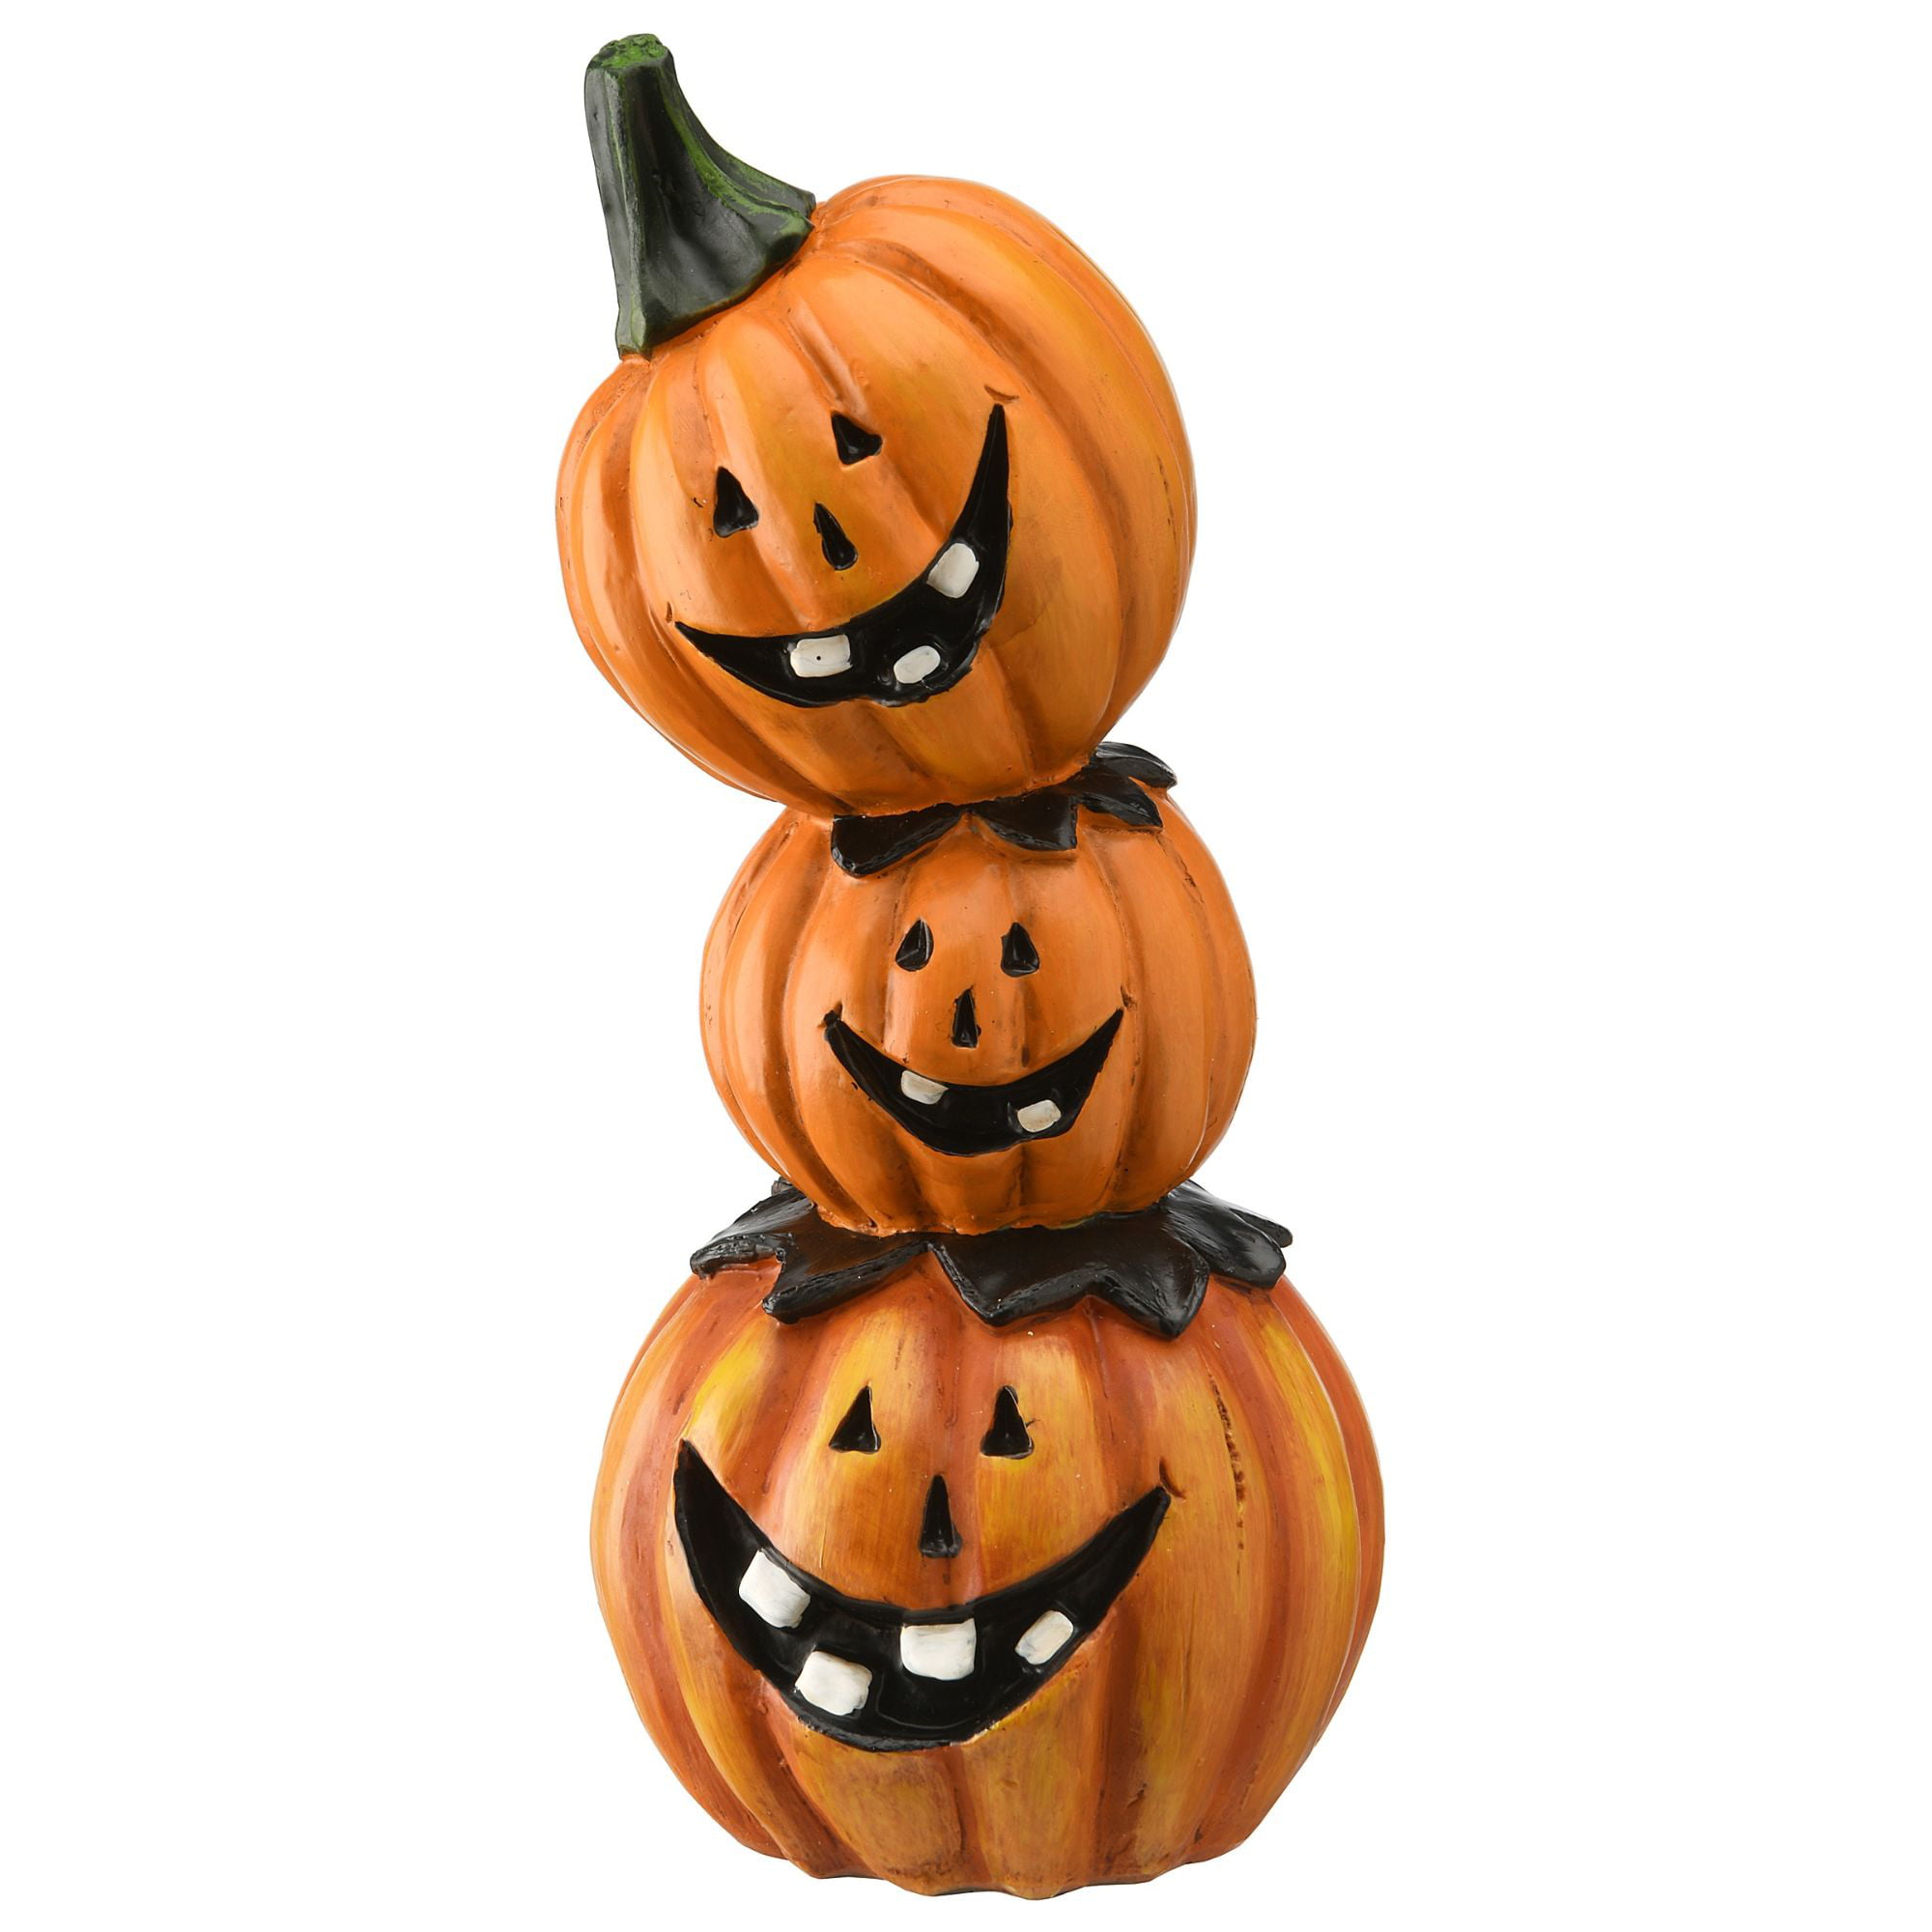 Pumpkin Express Train for Halloween Decorations Fall Home Decor Table Top Figurines 